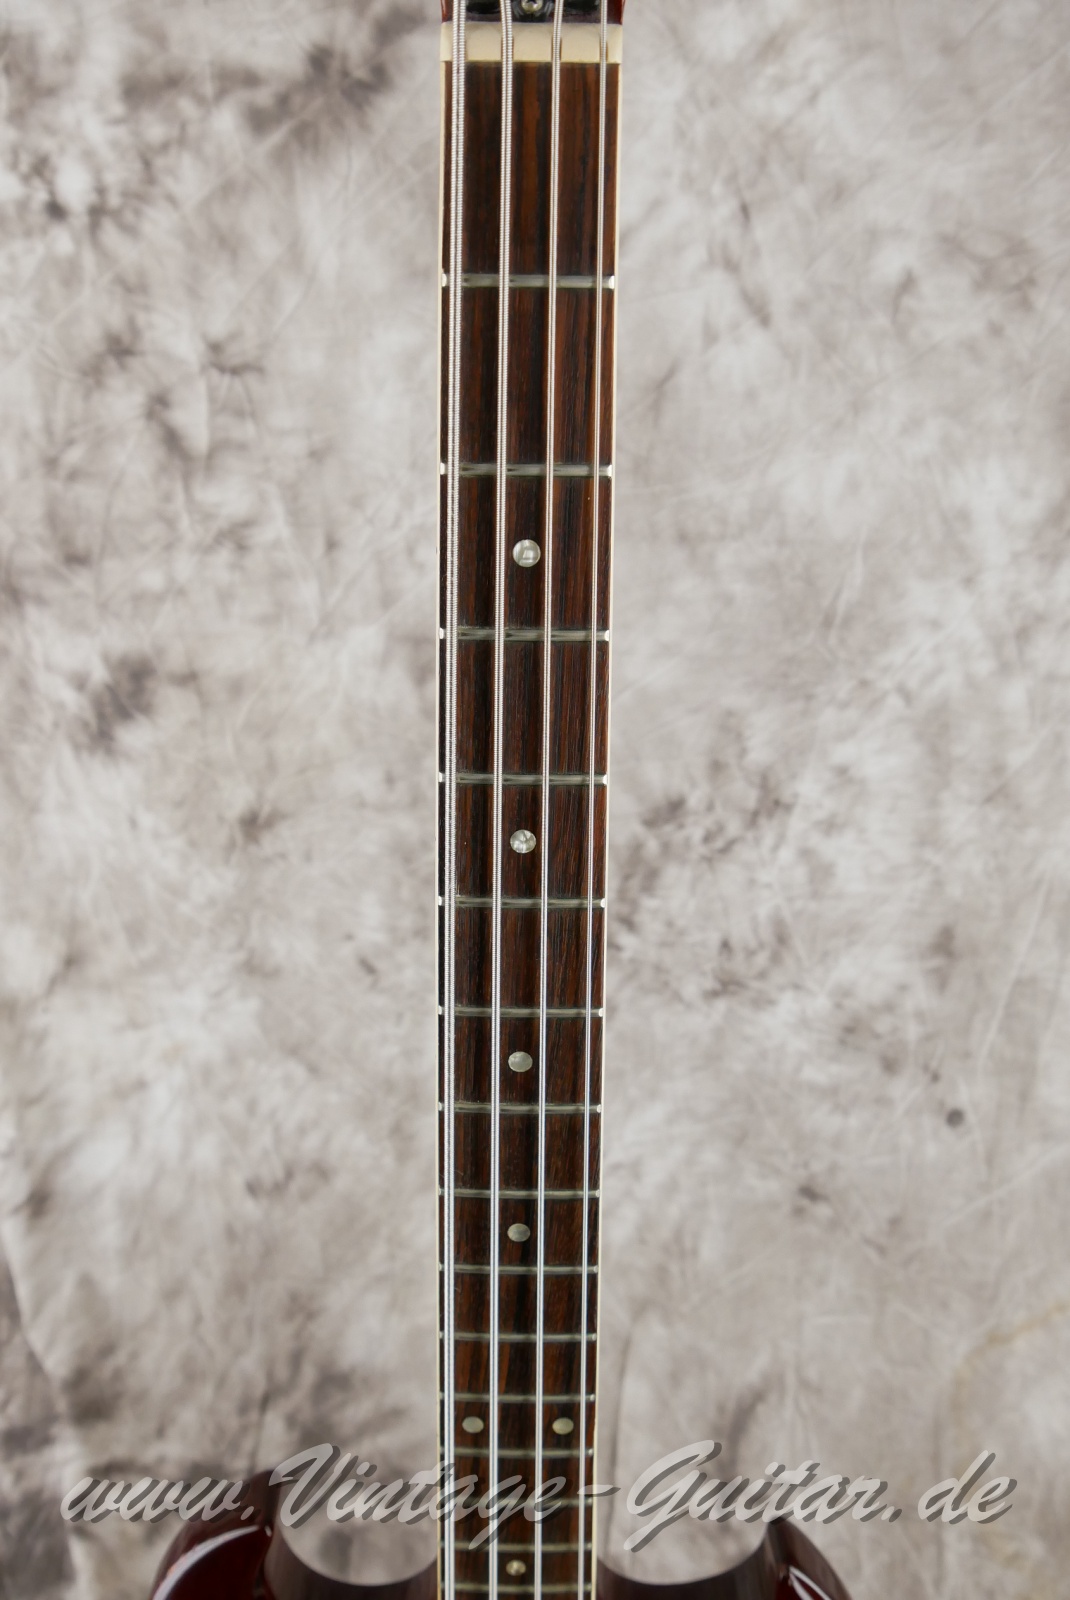 Gibson-EB3-slotted-headstock-1972-winered-005.jpg